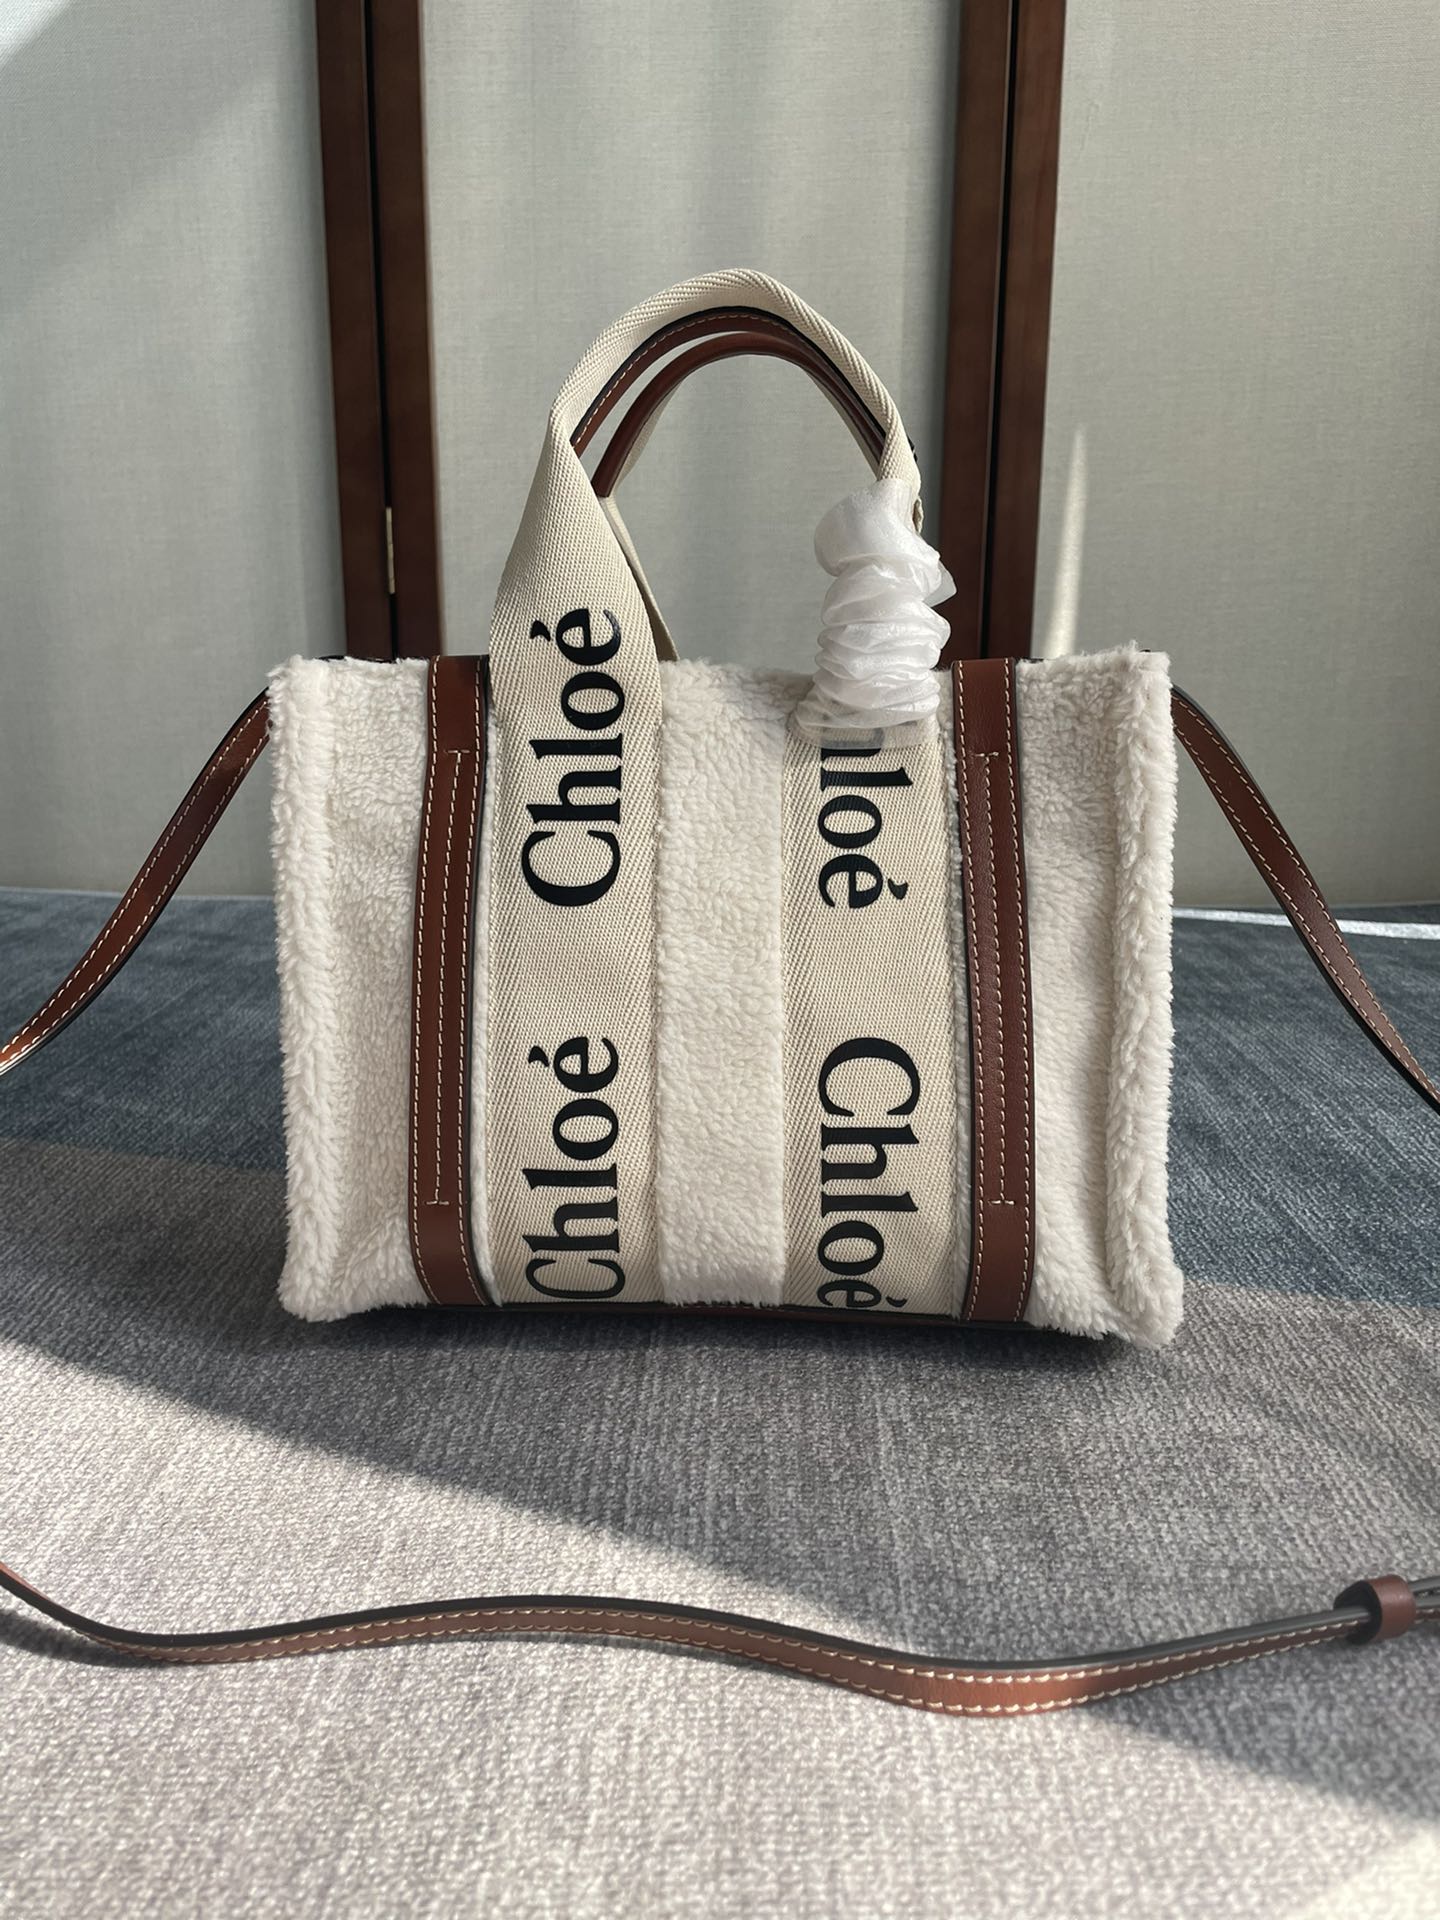 CH winter new styles Woody tote bag white